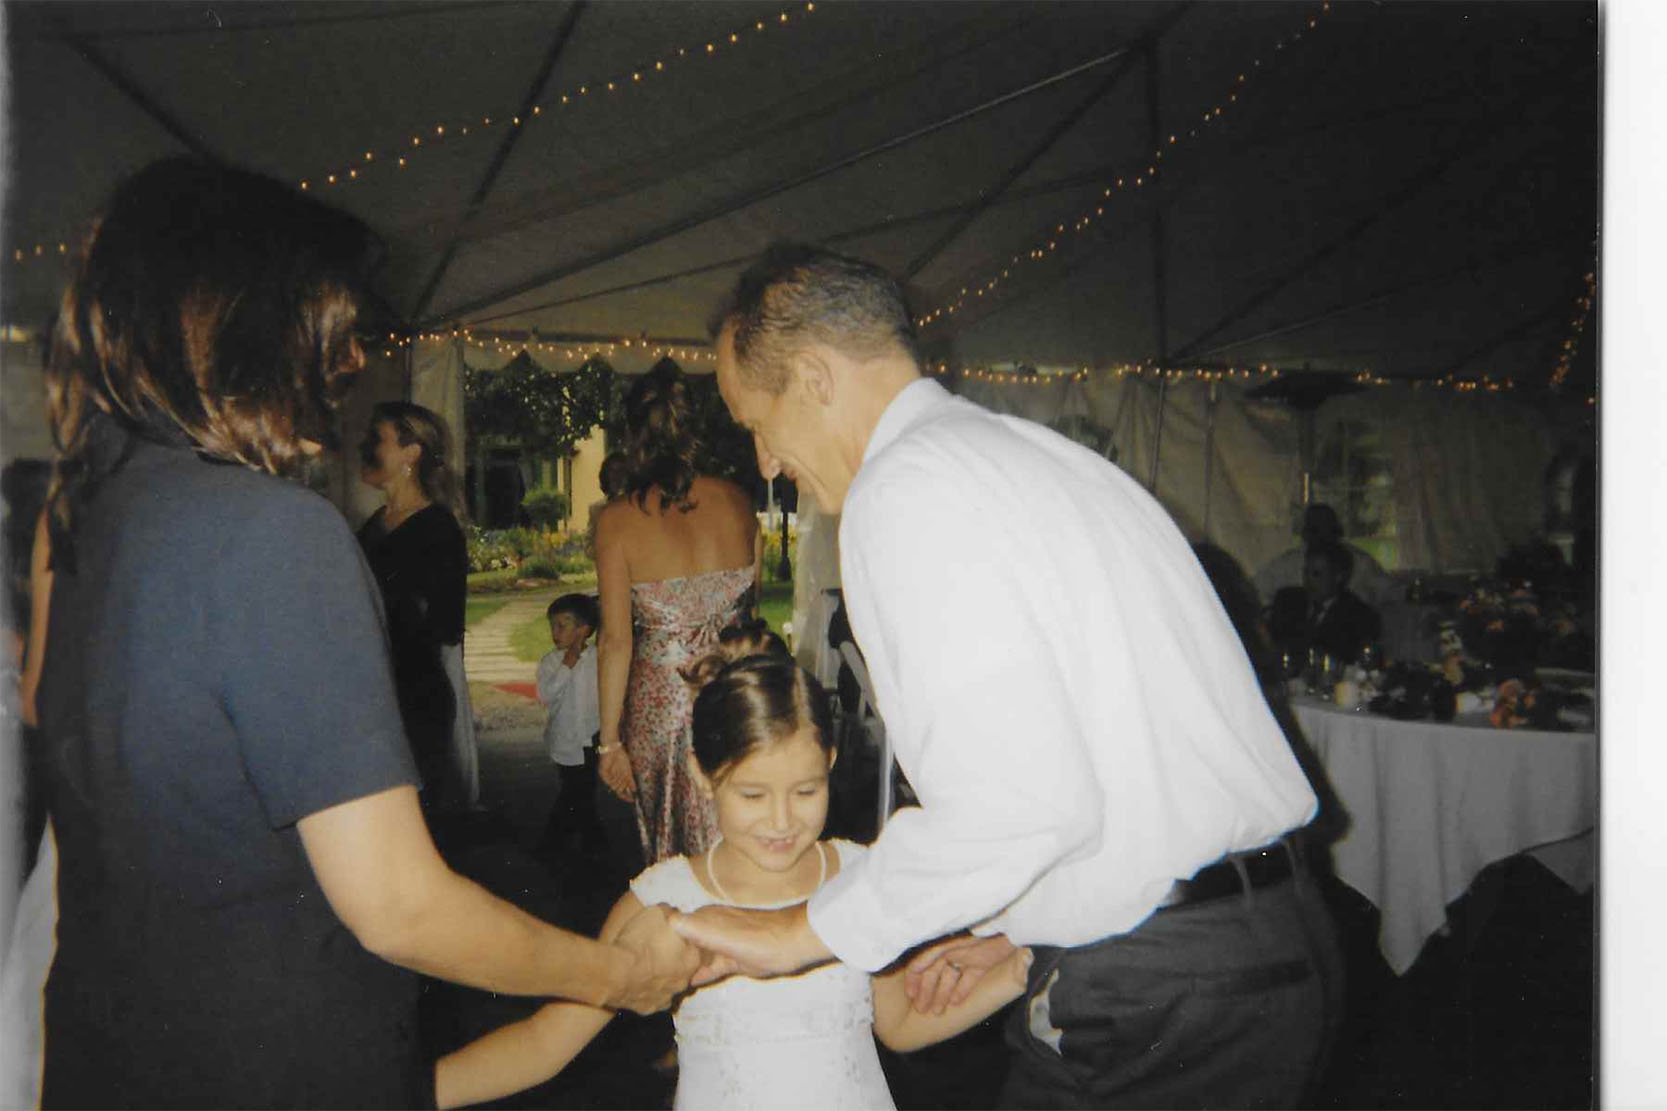 Skylar dancing with her dad and mom at her cousins wedding. 